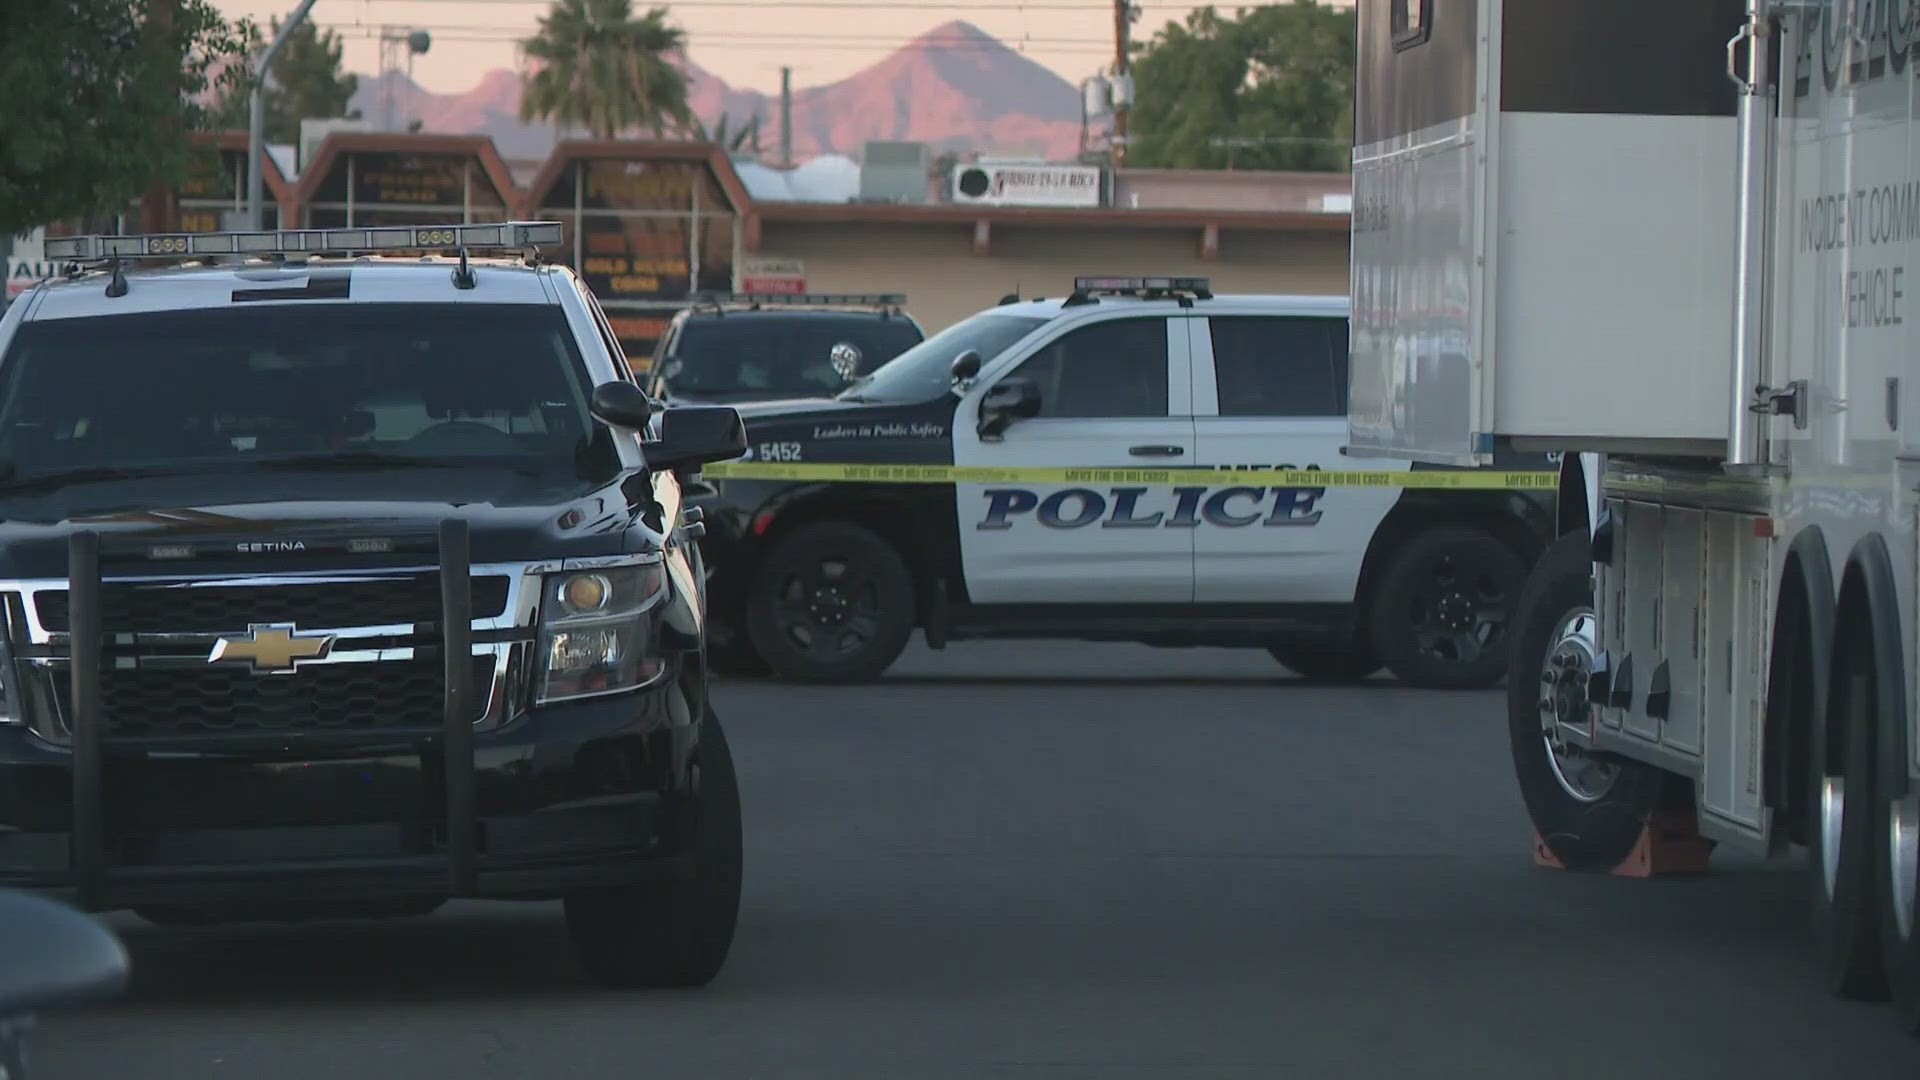 The shooting happened on a smaller street near Main Street and Stapley Drive on Friday morning. The suspect was not struck by lethal gunfire.